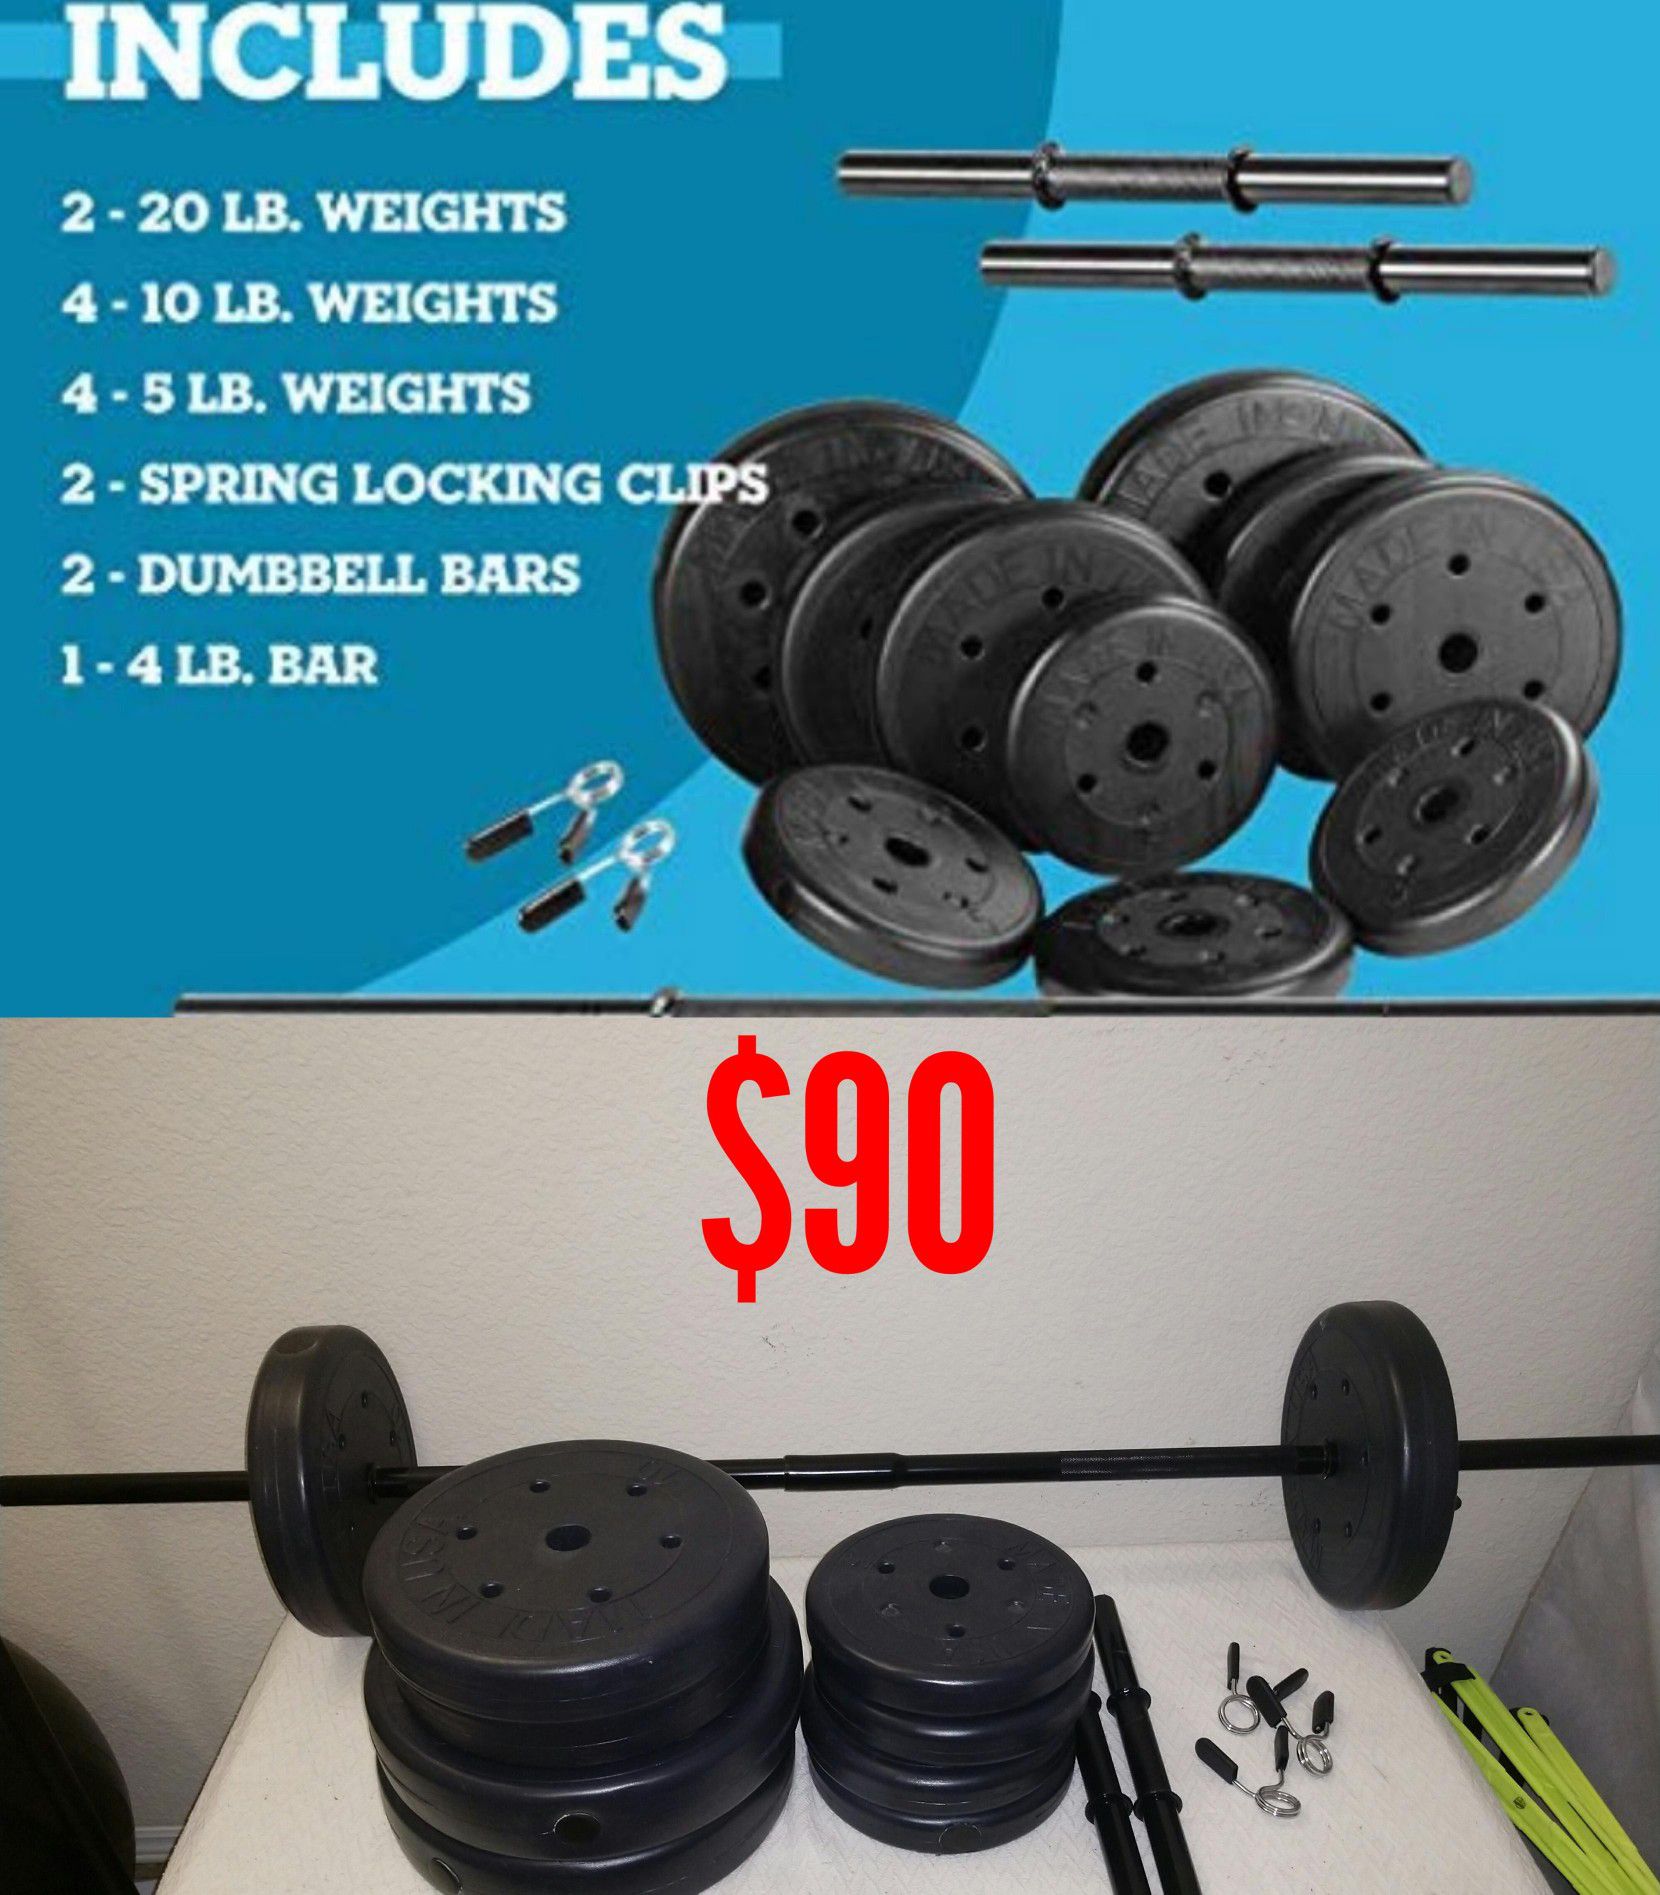 Exercise weights and equipment